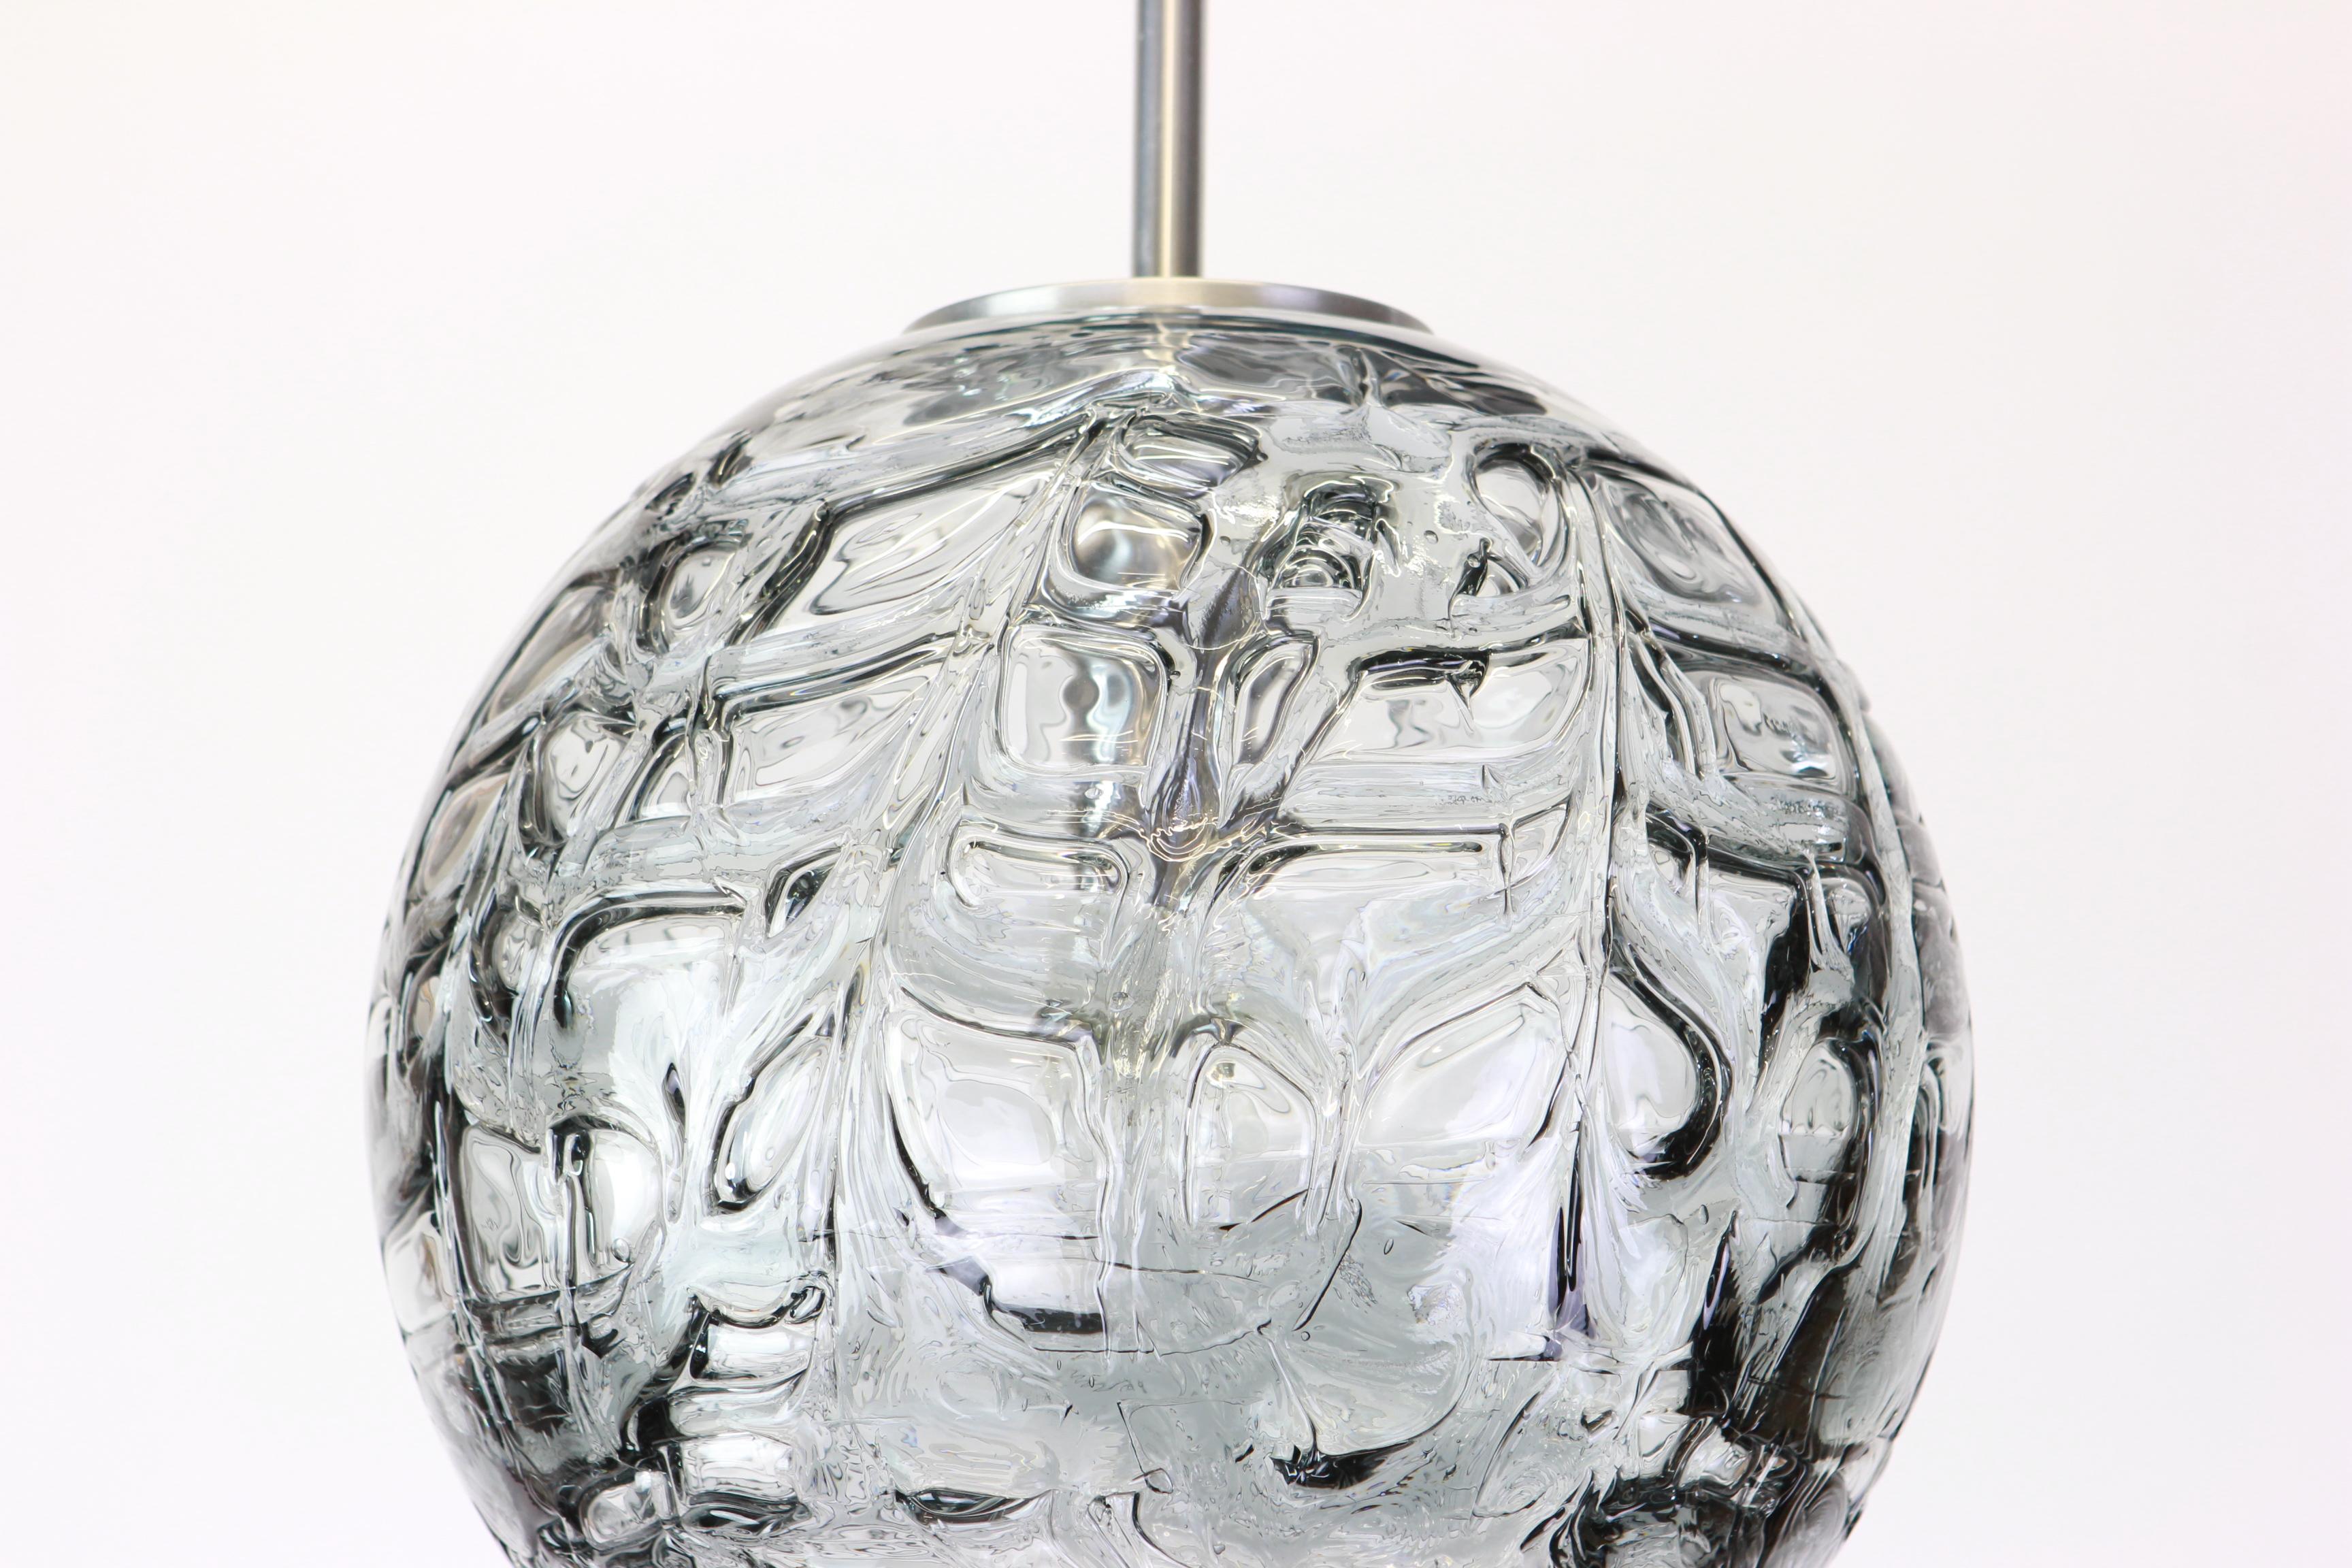 Doria ceiling light with large volcanic Murano glass ball.
A high quality of materials, gives a wonderful light effect when it is on.

Cleaned, well-wired and ready to use. The fixture requires one E27 Standard bulb with 100W max and compatible